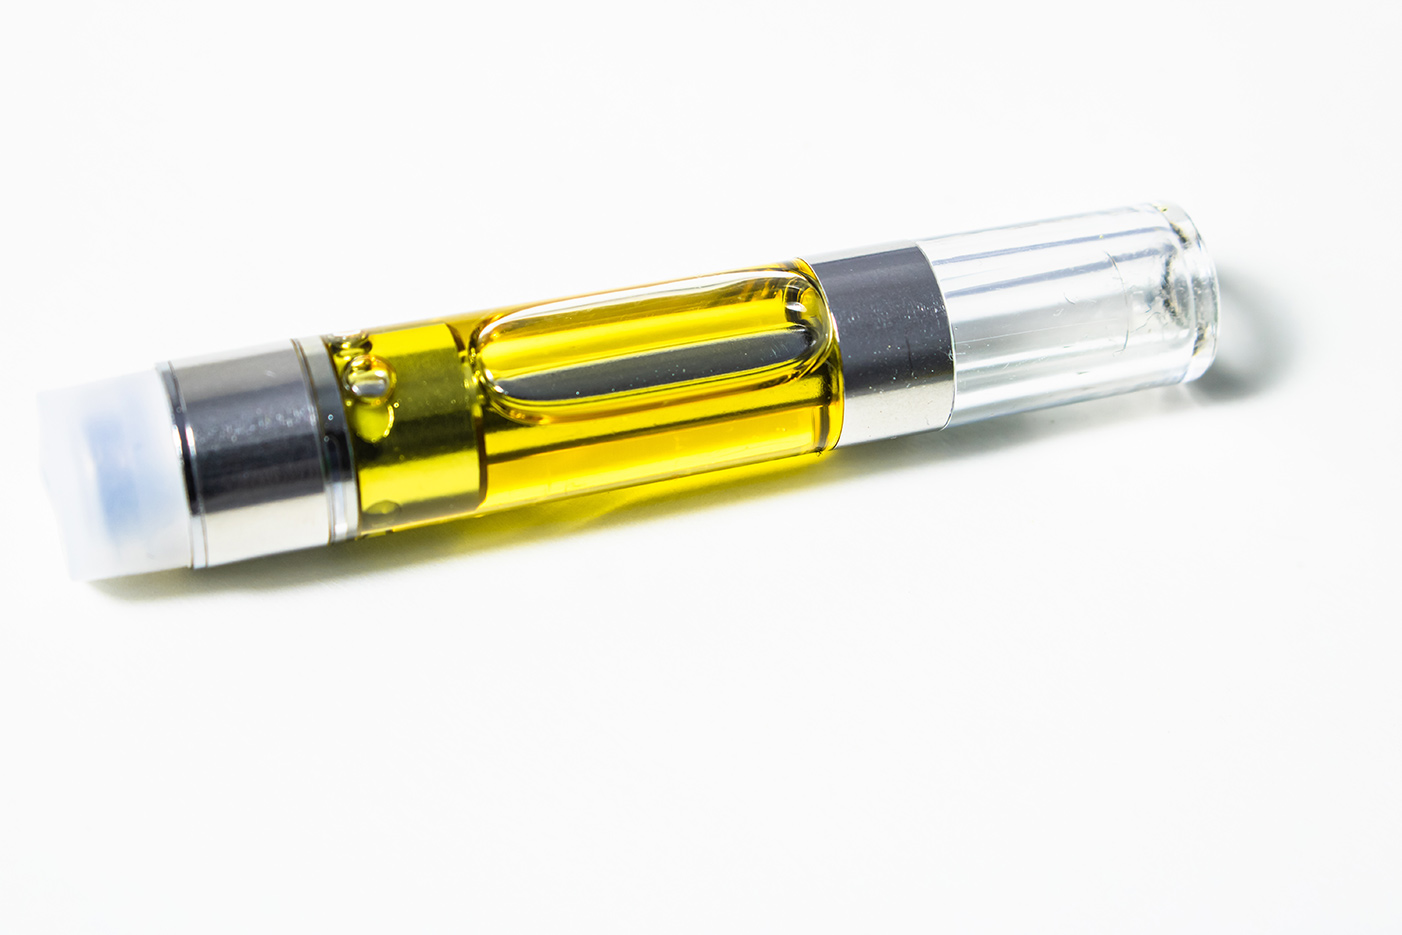 What are THC carts and how are they used?